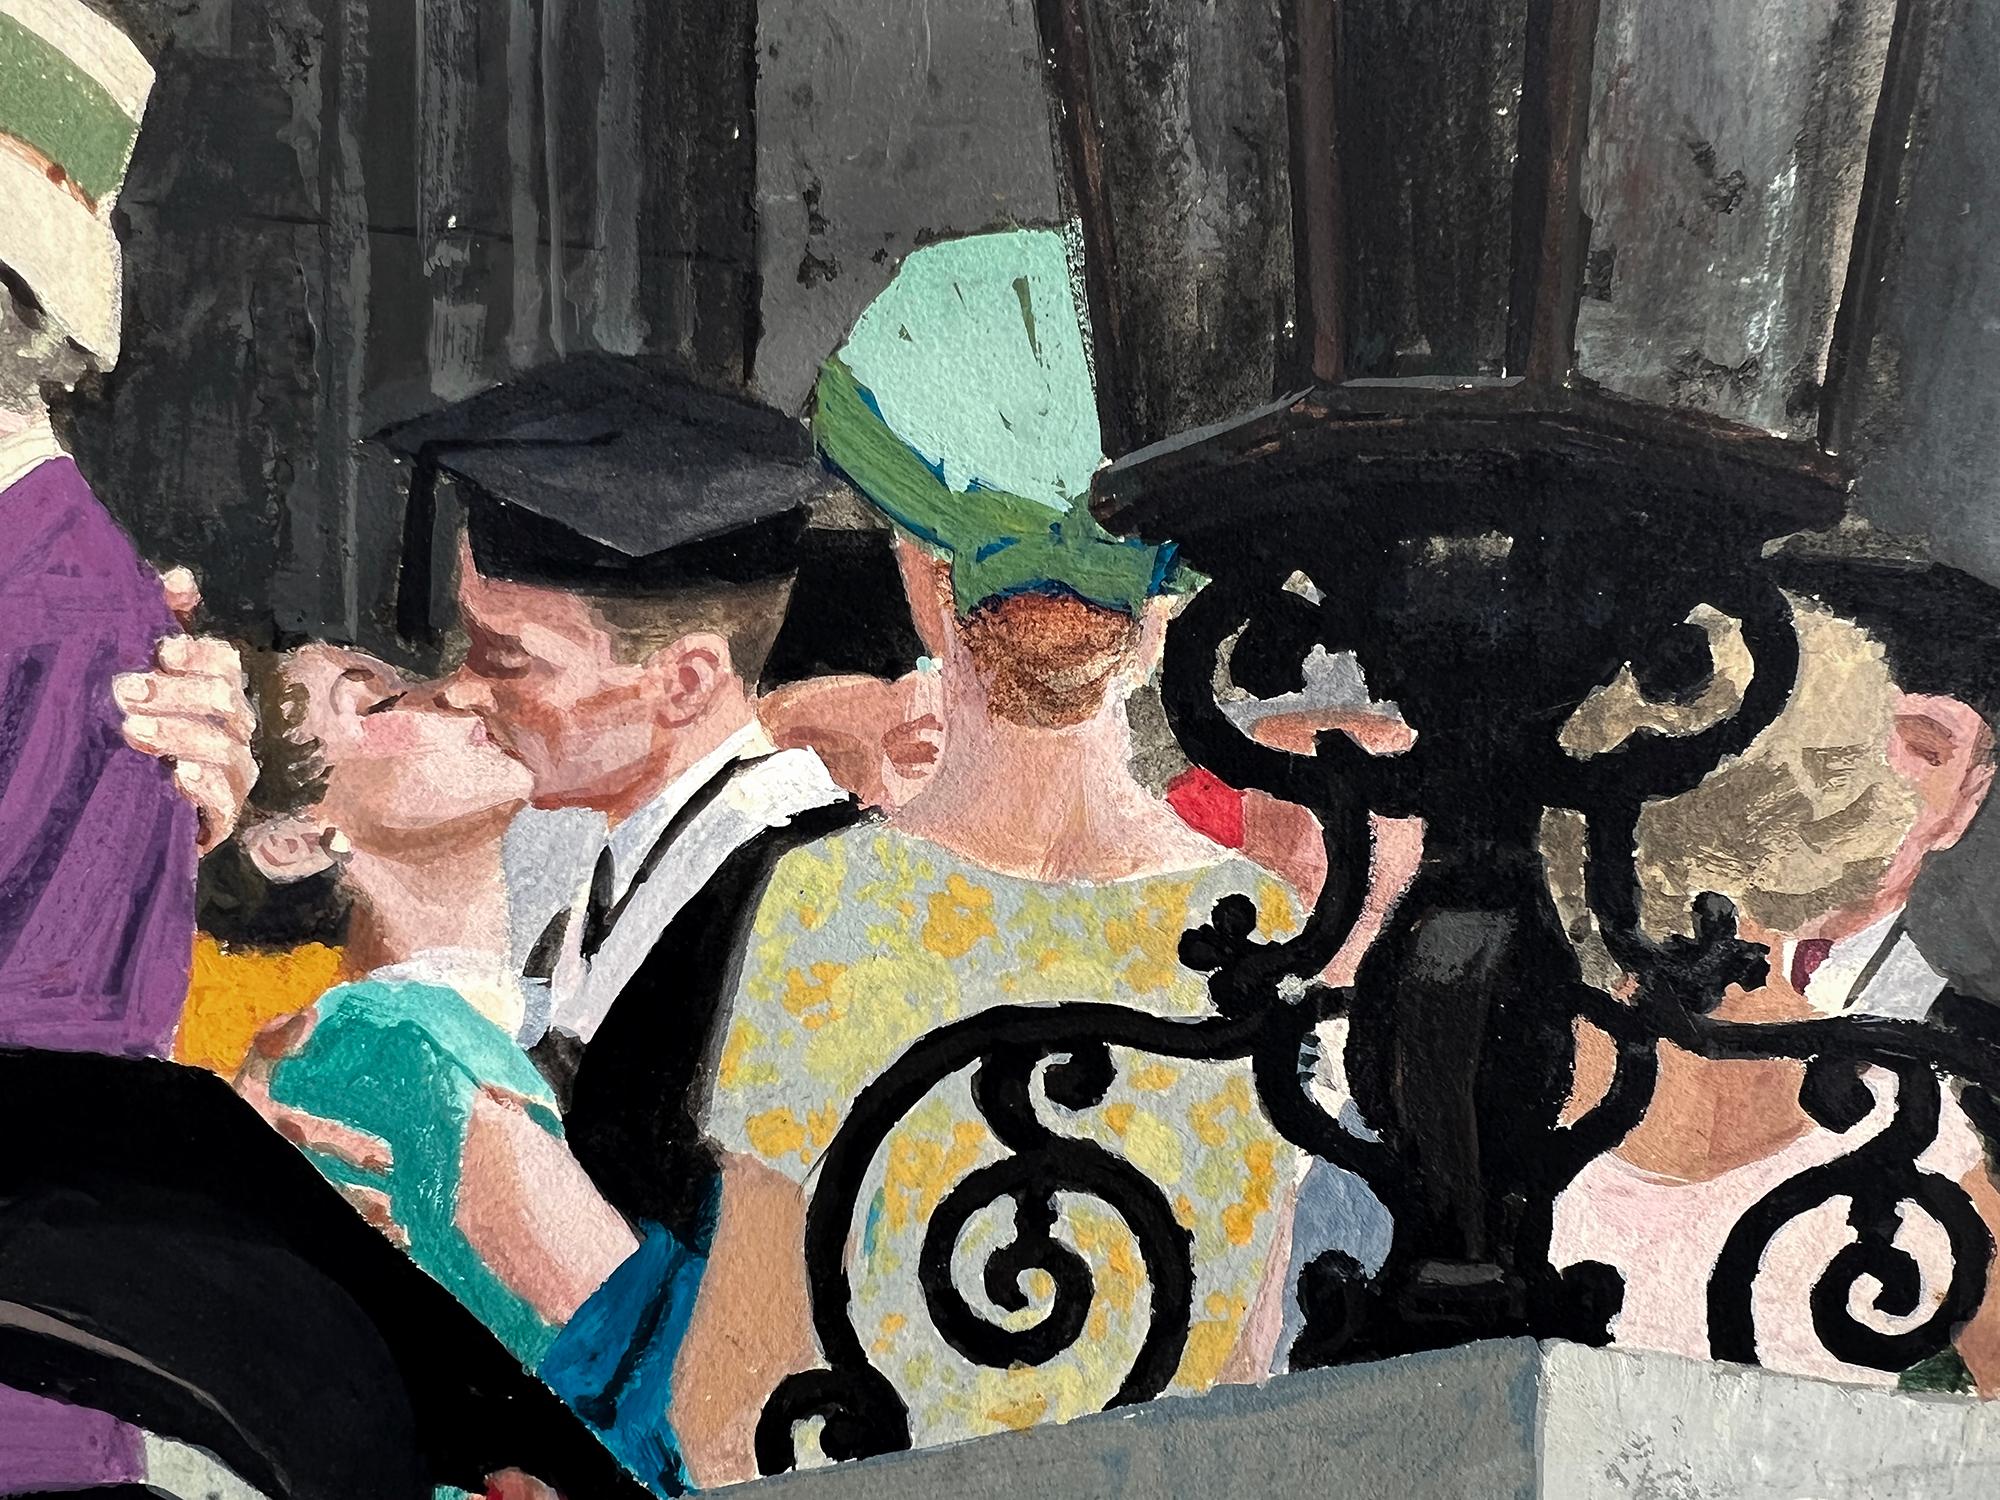 “Graduation Day”  is emblematic of mid-century American Illustration. 
But the real story of this storytelling work is that it embodies the lost art of portrait painting and graphic design. 
Alex Ross borrows on the classical tradition and flaunts